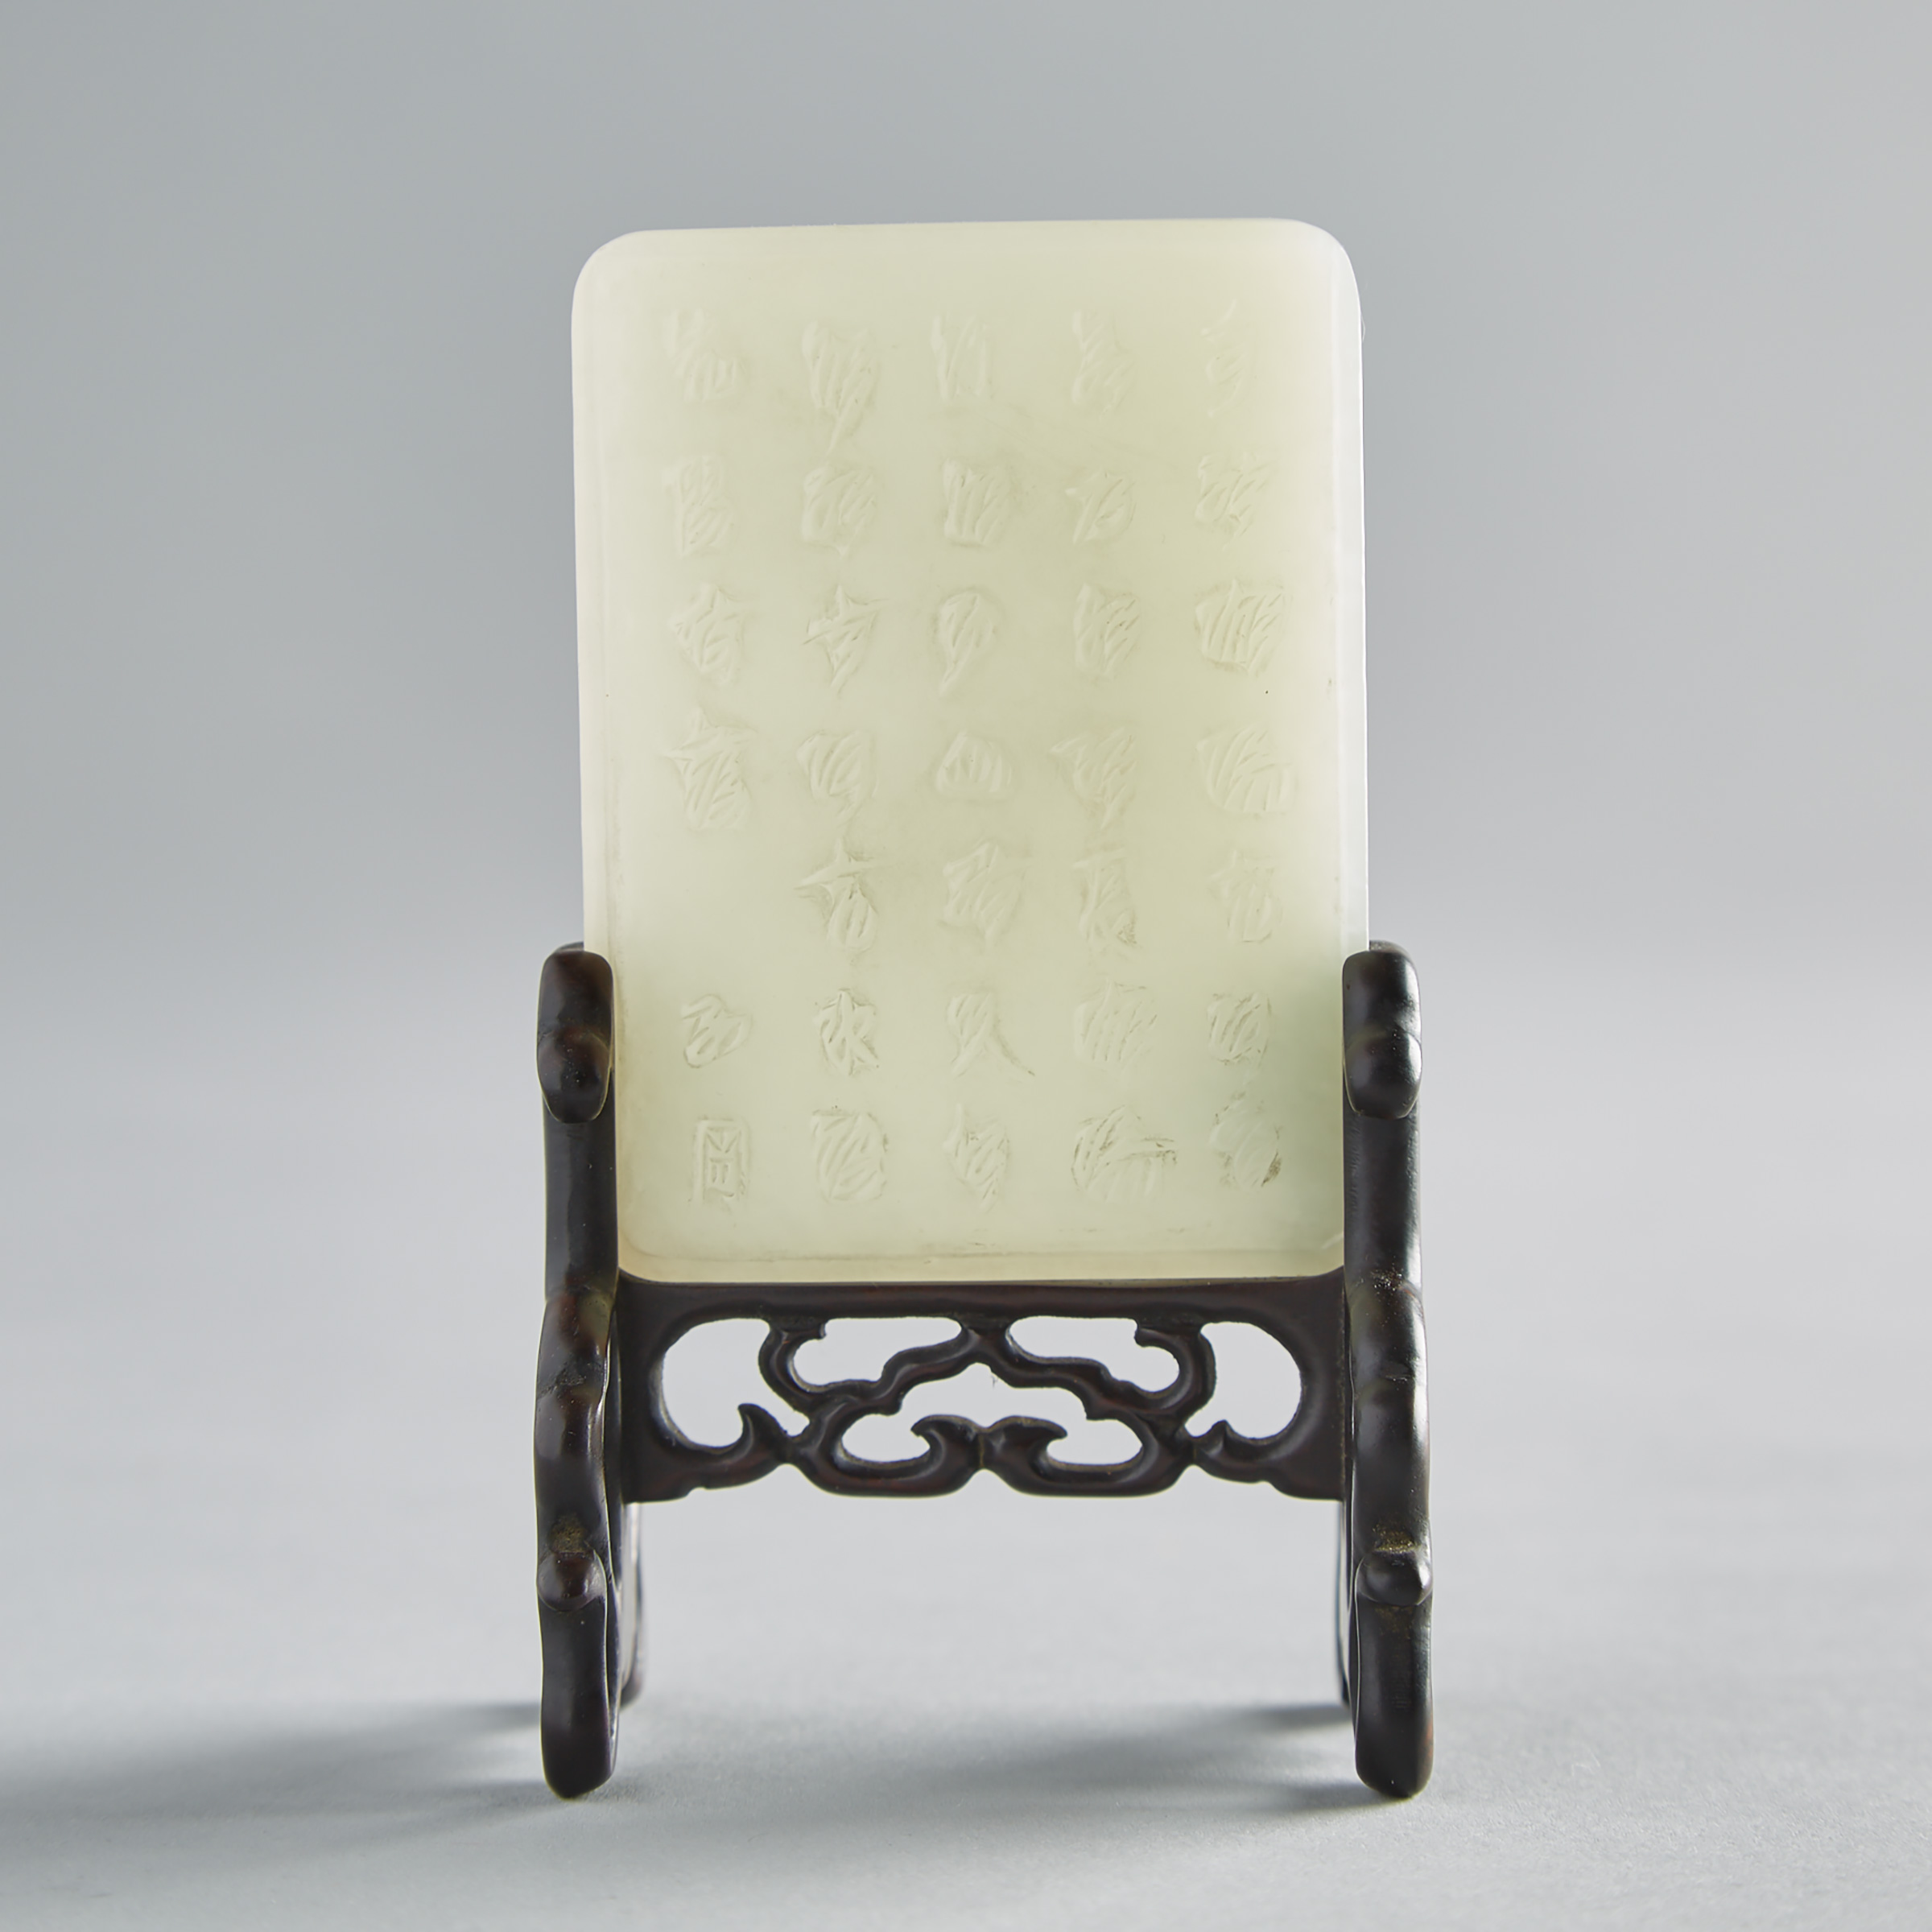 A Rectangular White Jade Plaque Mounted on a Stand